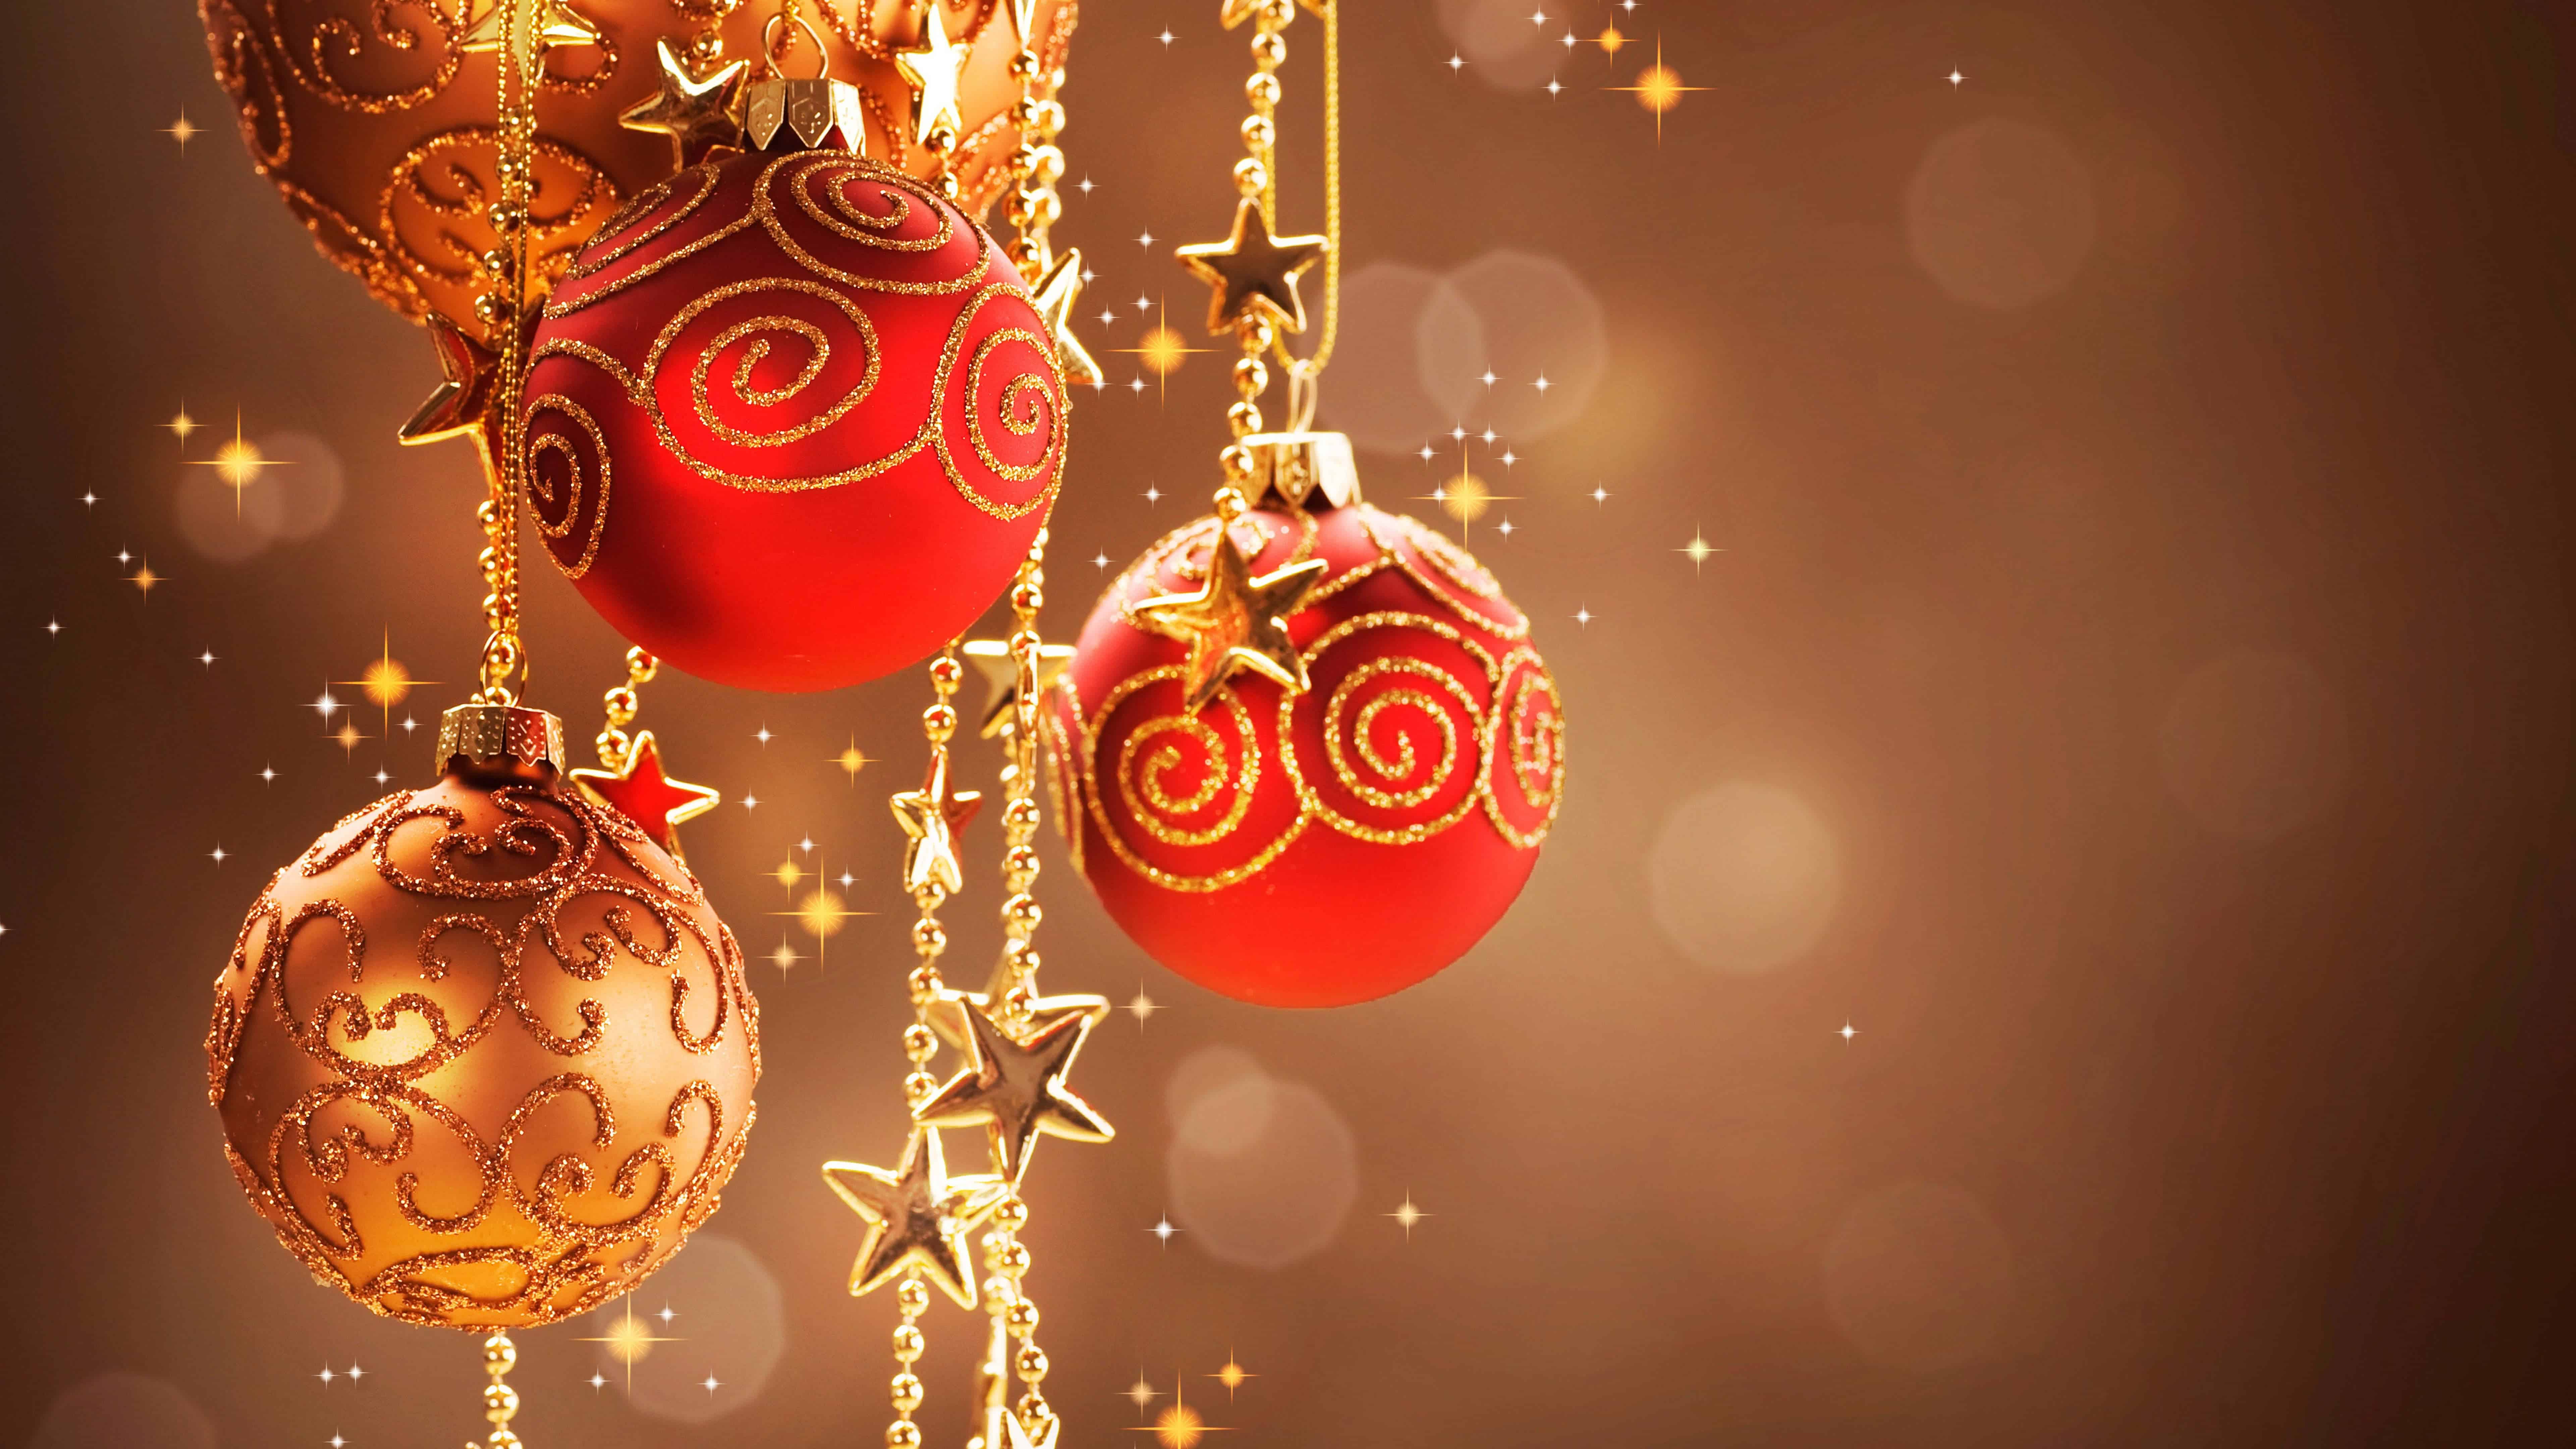 Red and Gold Christmas Wallpaper Free Red and Gold Christmas Background